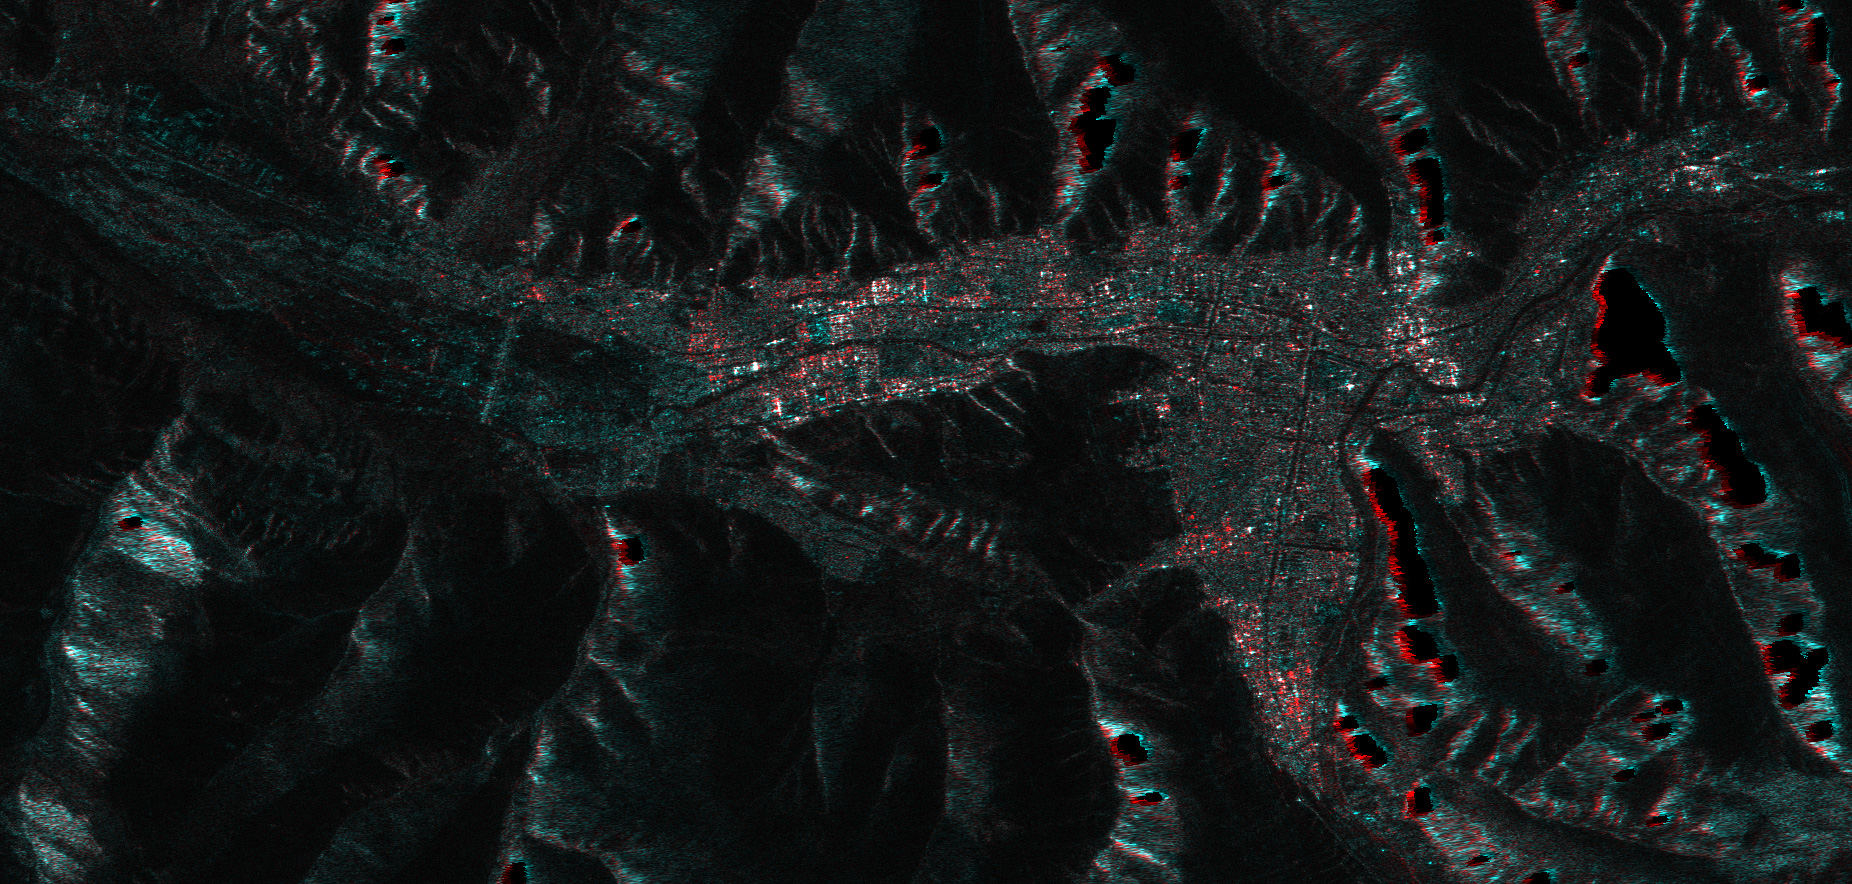 Figure 3 shows a PALSAR amplitude image around Yushu which is surrounded by a red rectangle in Figure 2 right panel. Red colors are assgined to an amplitude image on Jan. 15, 2010, while green and blue colors are given to an image on Apr. 17, 2010.